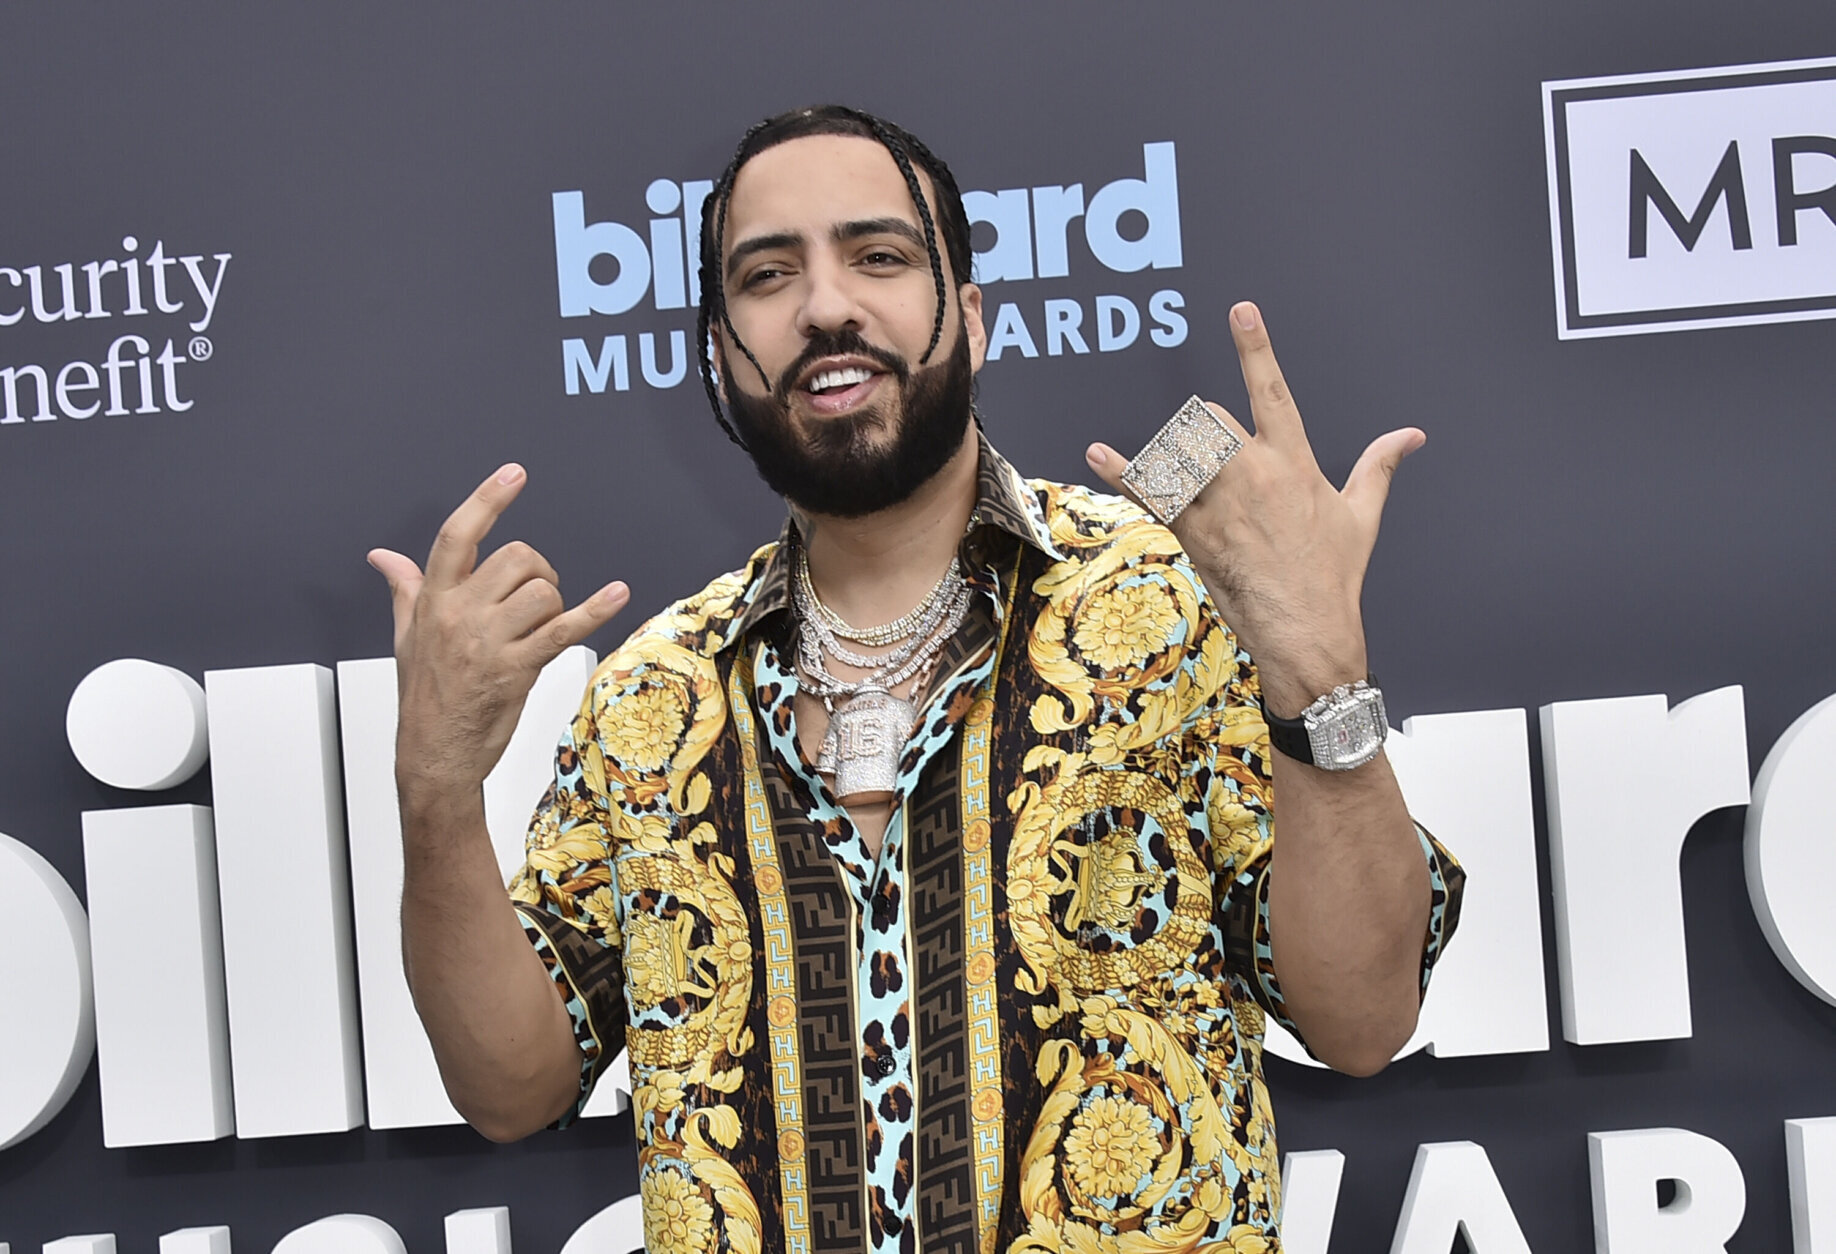 French Montana arrives at the Billboard Music Awards on Sunday, May 15, 2022, at the MGM Grand Garden Arena in Las Vegas. (Photo by Jordan Strauss/Invision/AP)